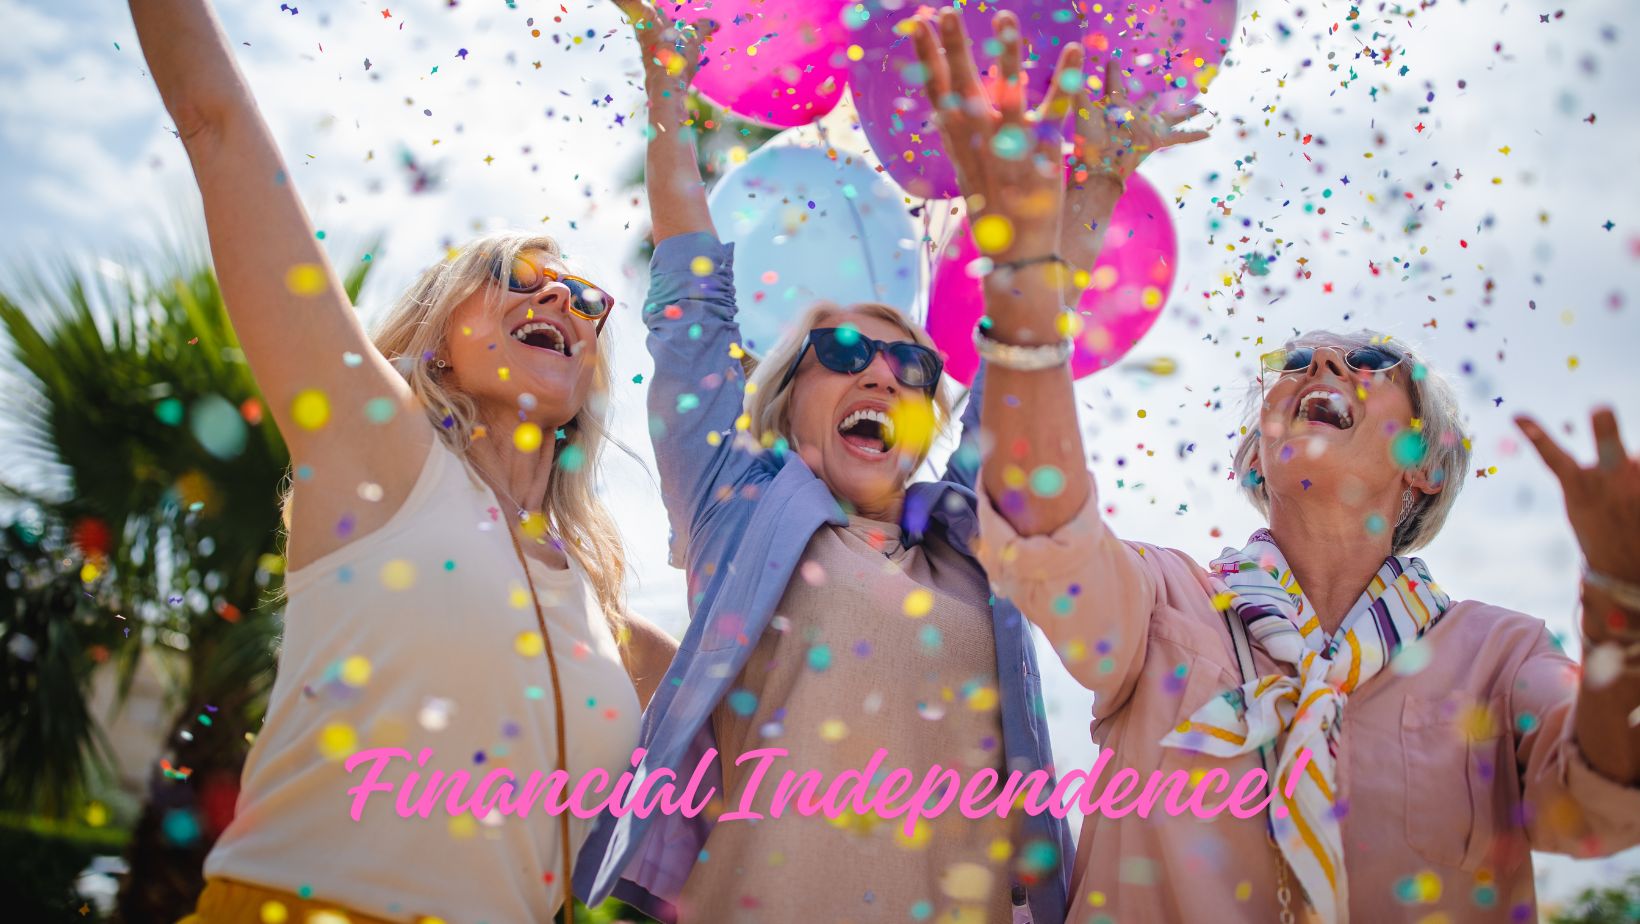 Empowering Financial Independence for Women